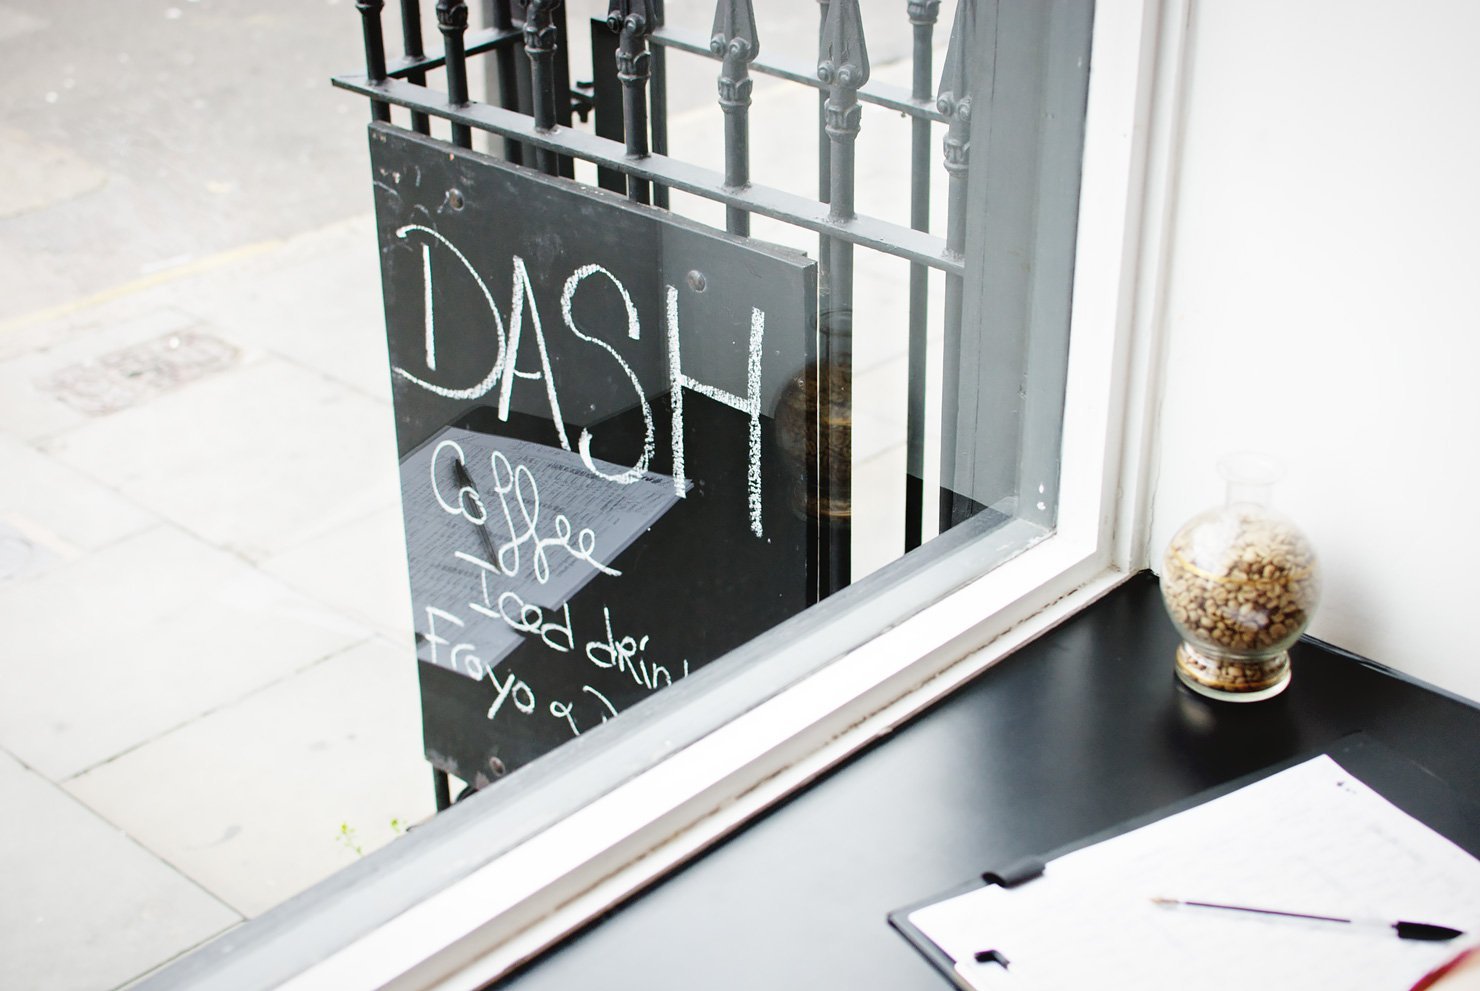 Coffee tasting (or cupping) at Drink, Shop & Dash - a new specialty coffee bar in King's Cross in London